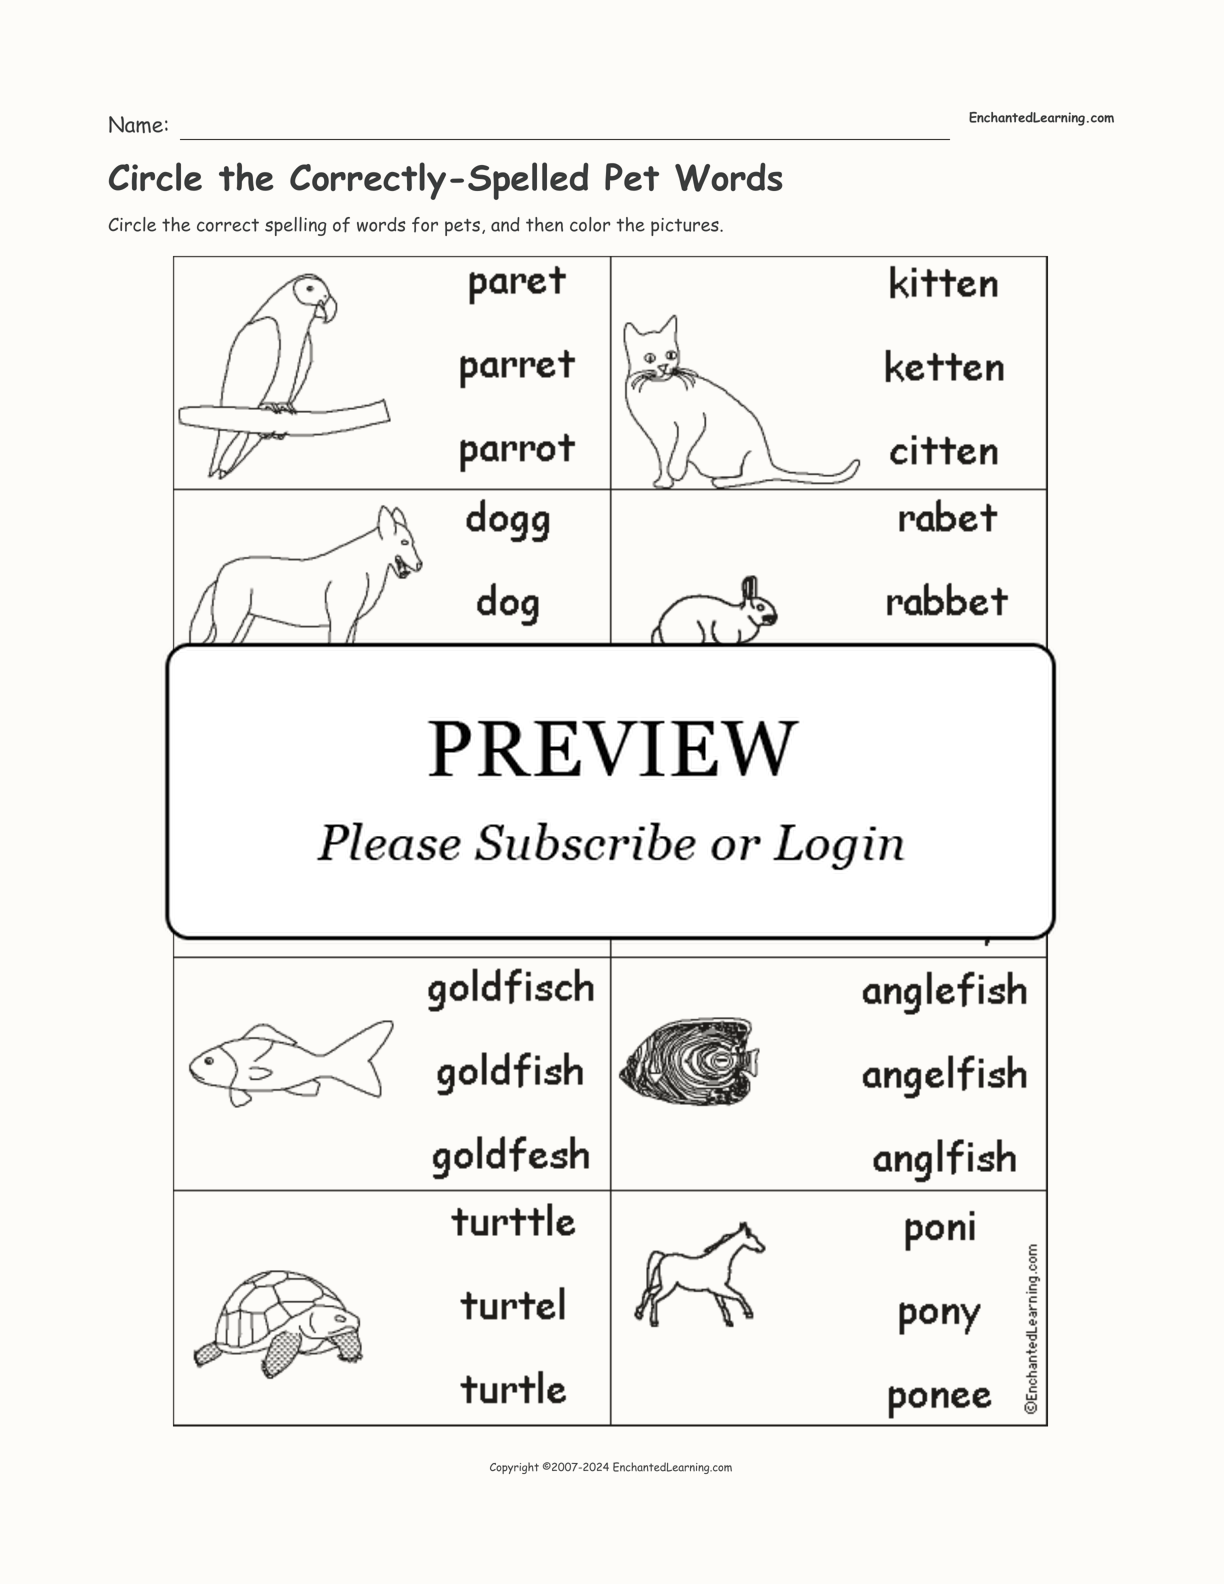 Circle the Correctly-Spelled Pet Words interactive worksheet page 1